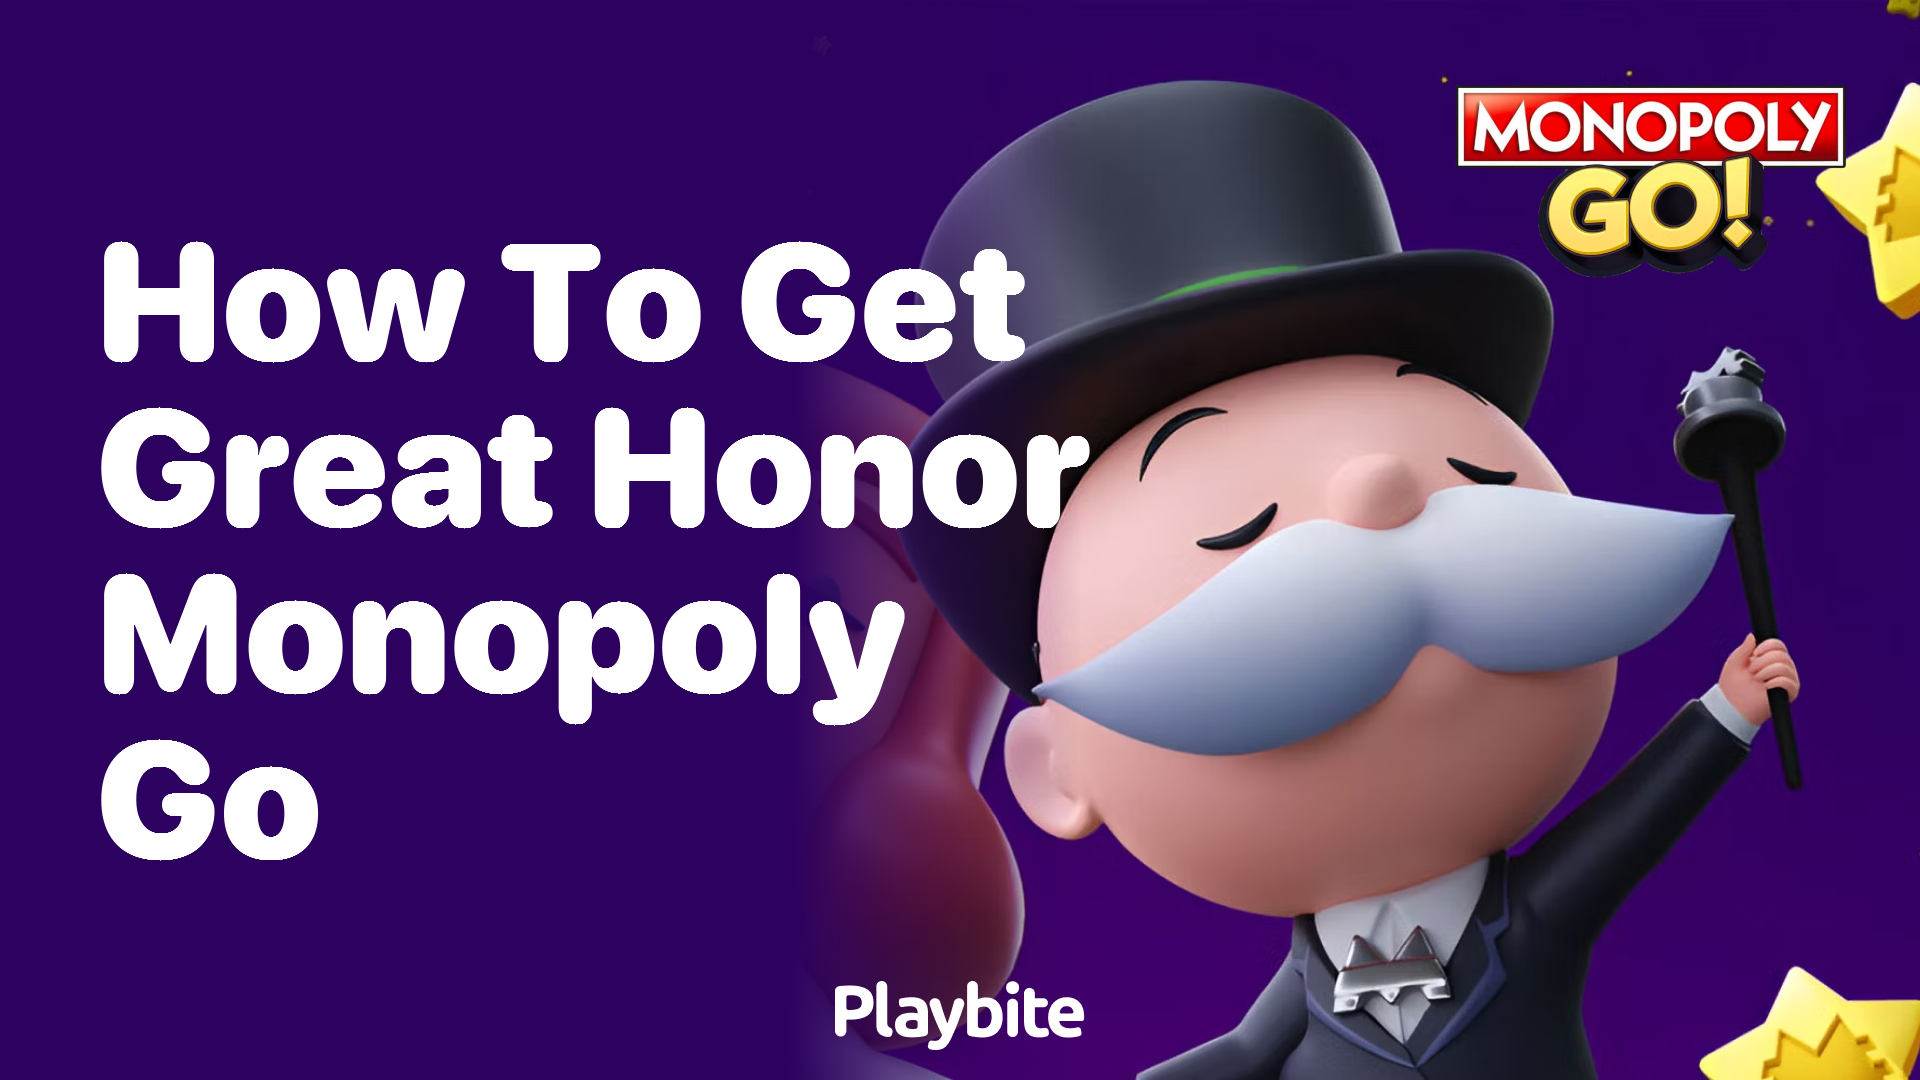 How to Get Great Honor in Monopoly Go